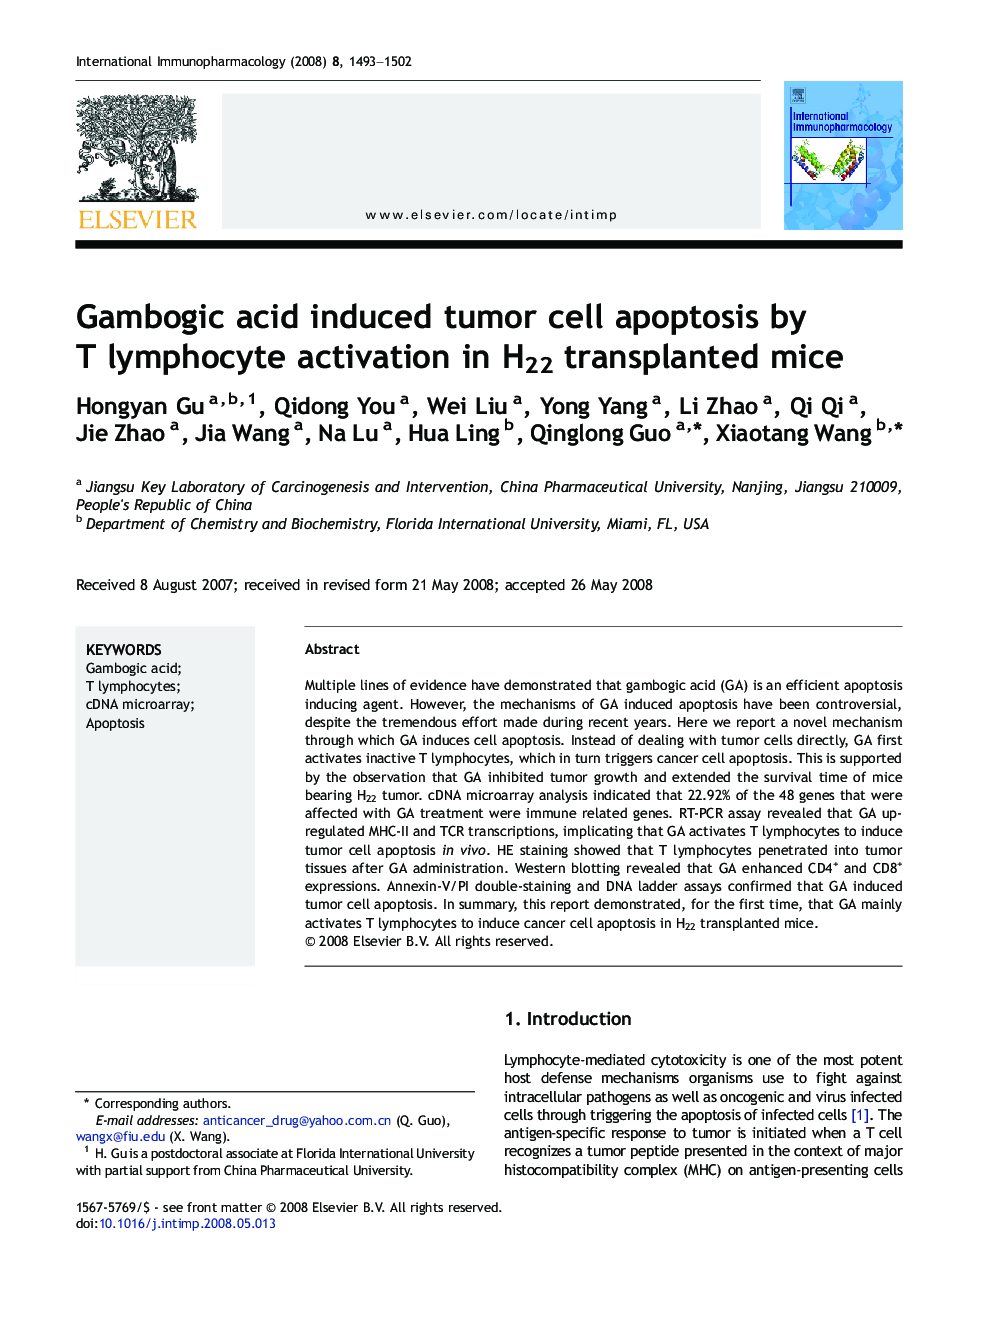 Gambogic acid induced tumor cell apoptosis by T lymphocyte activation in H22 transplanted mice